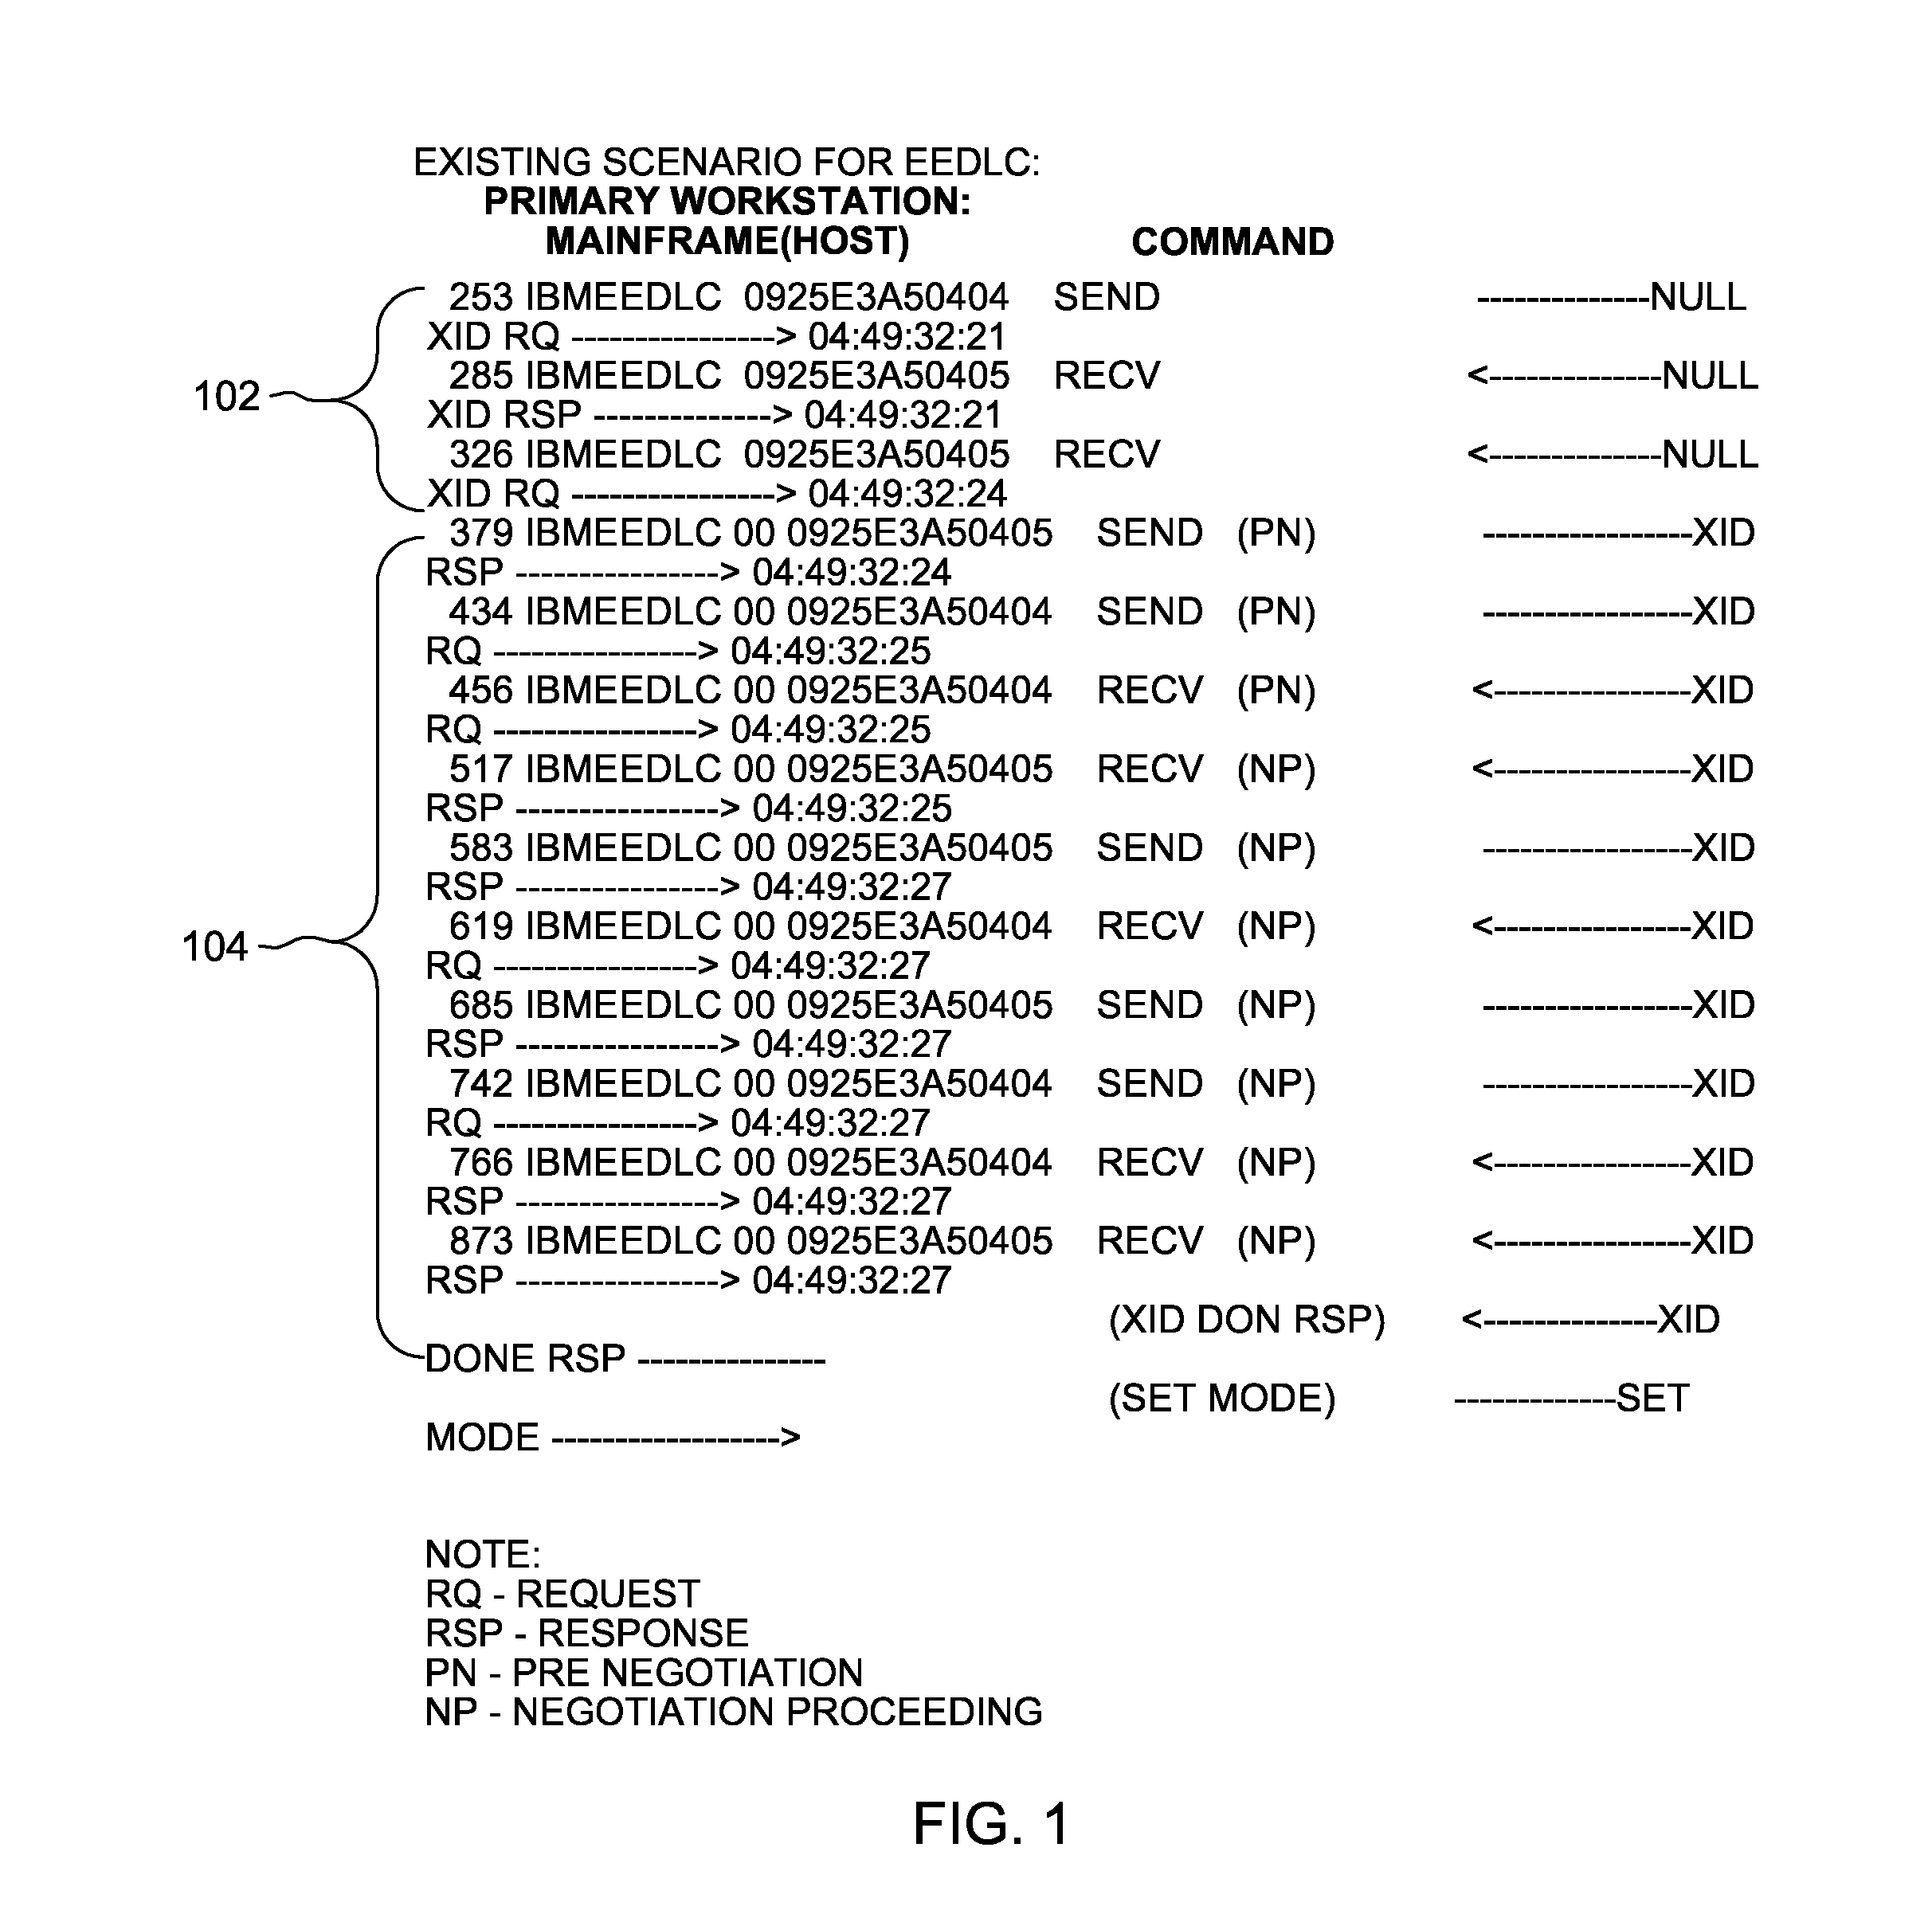 Method and system for establishing connections between nodes in a communication network